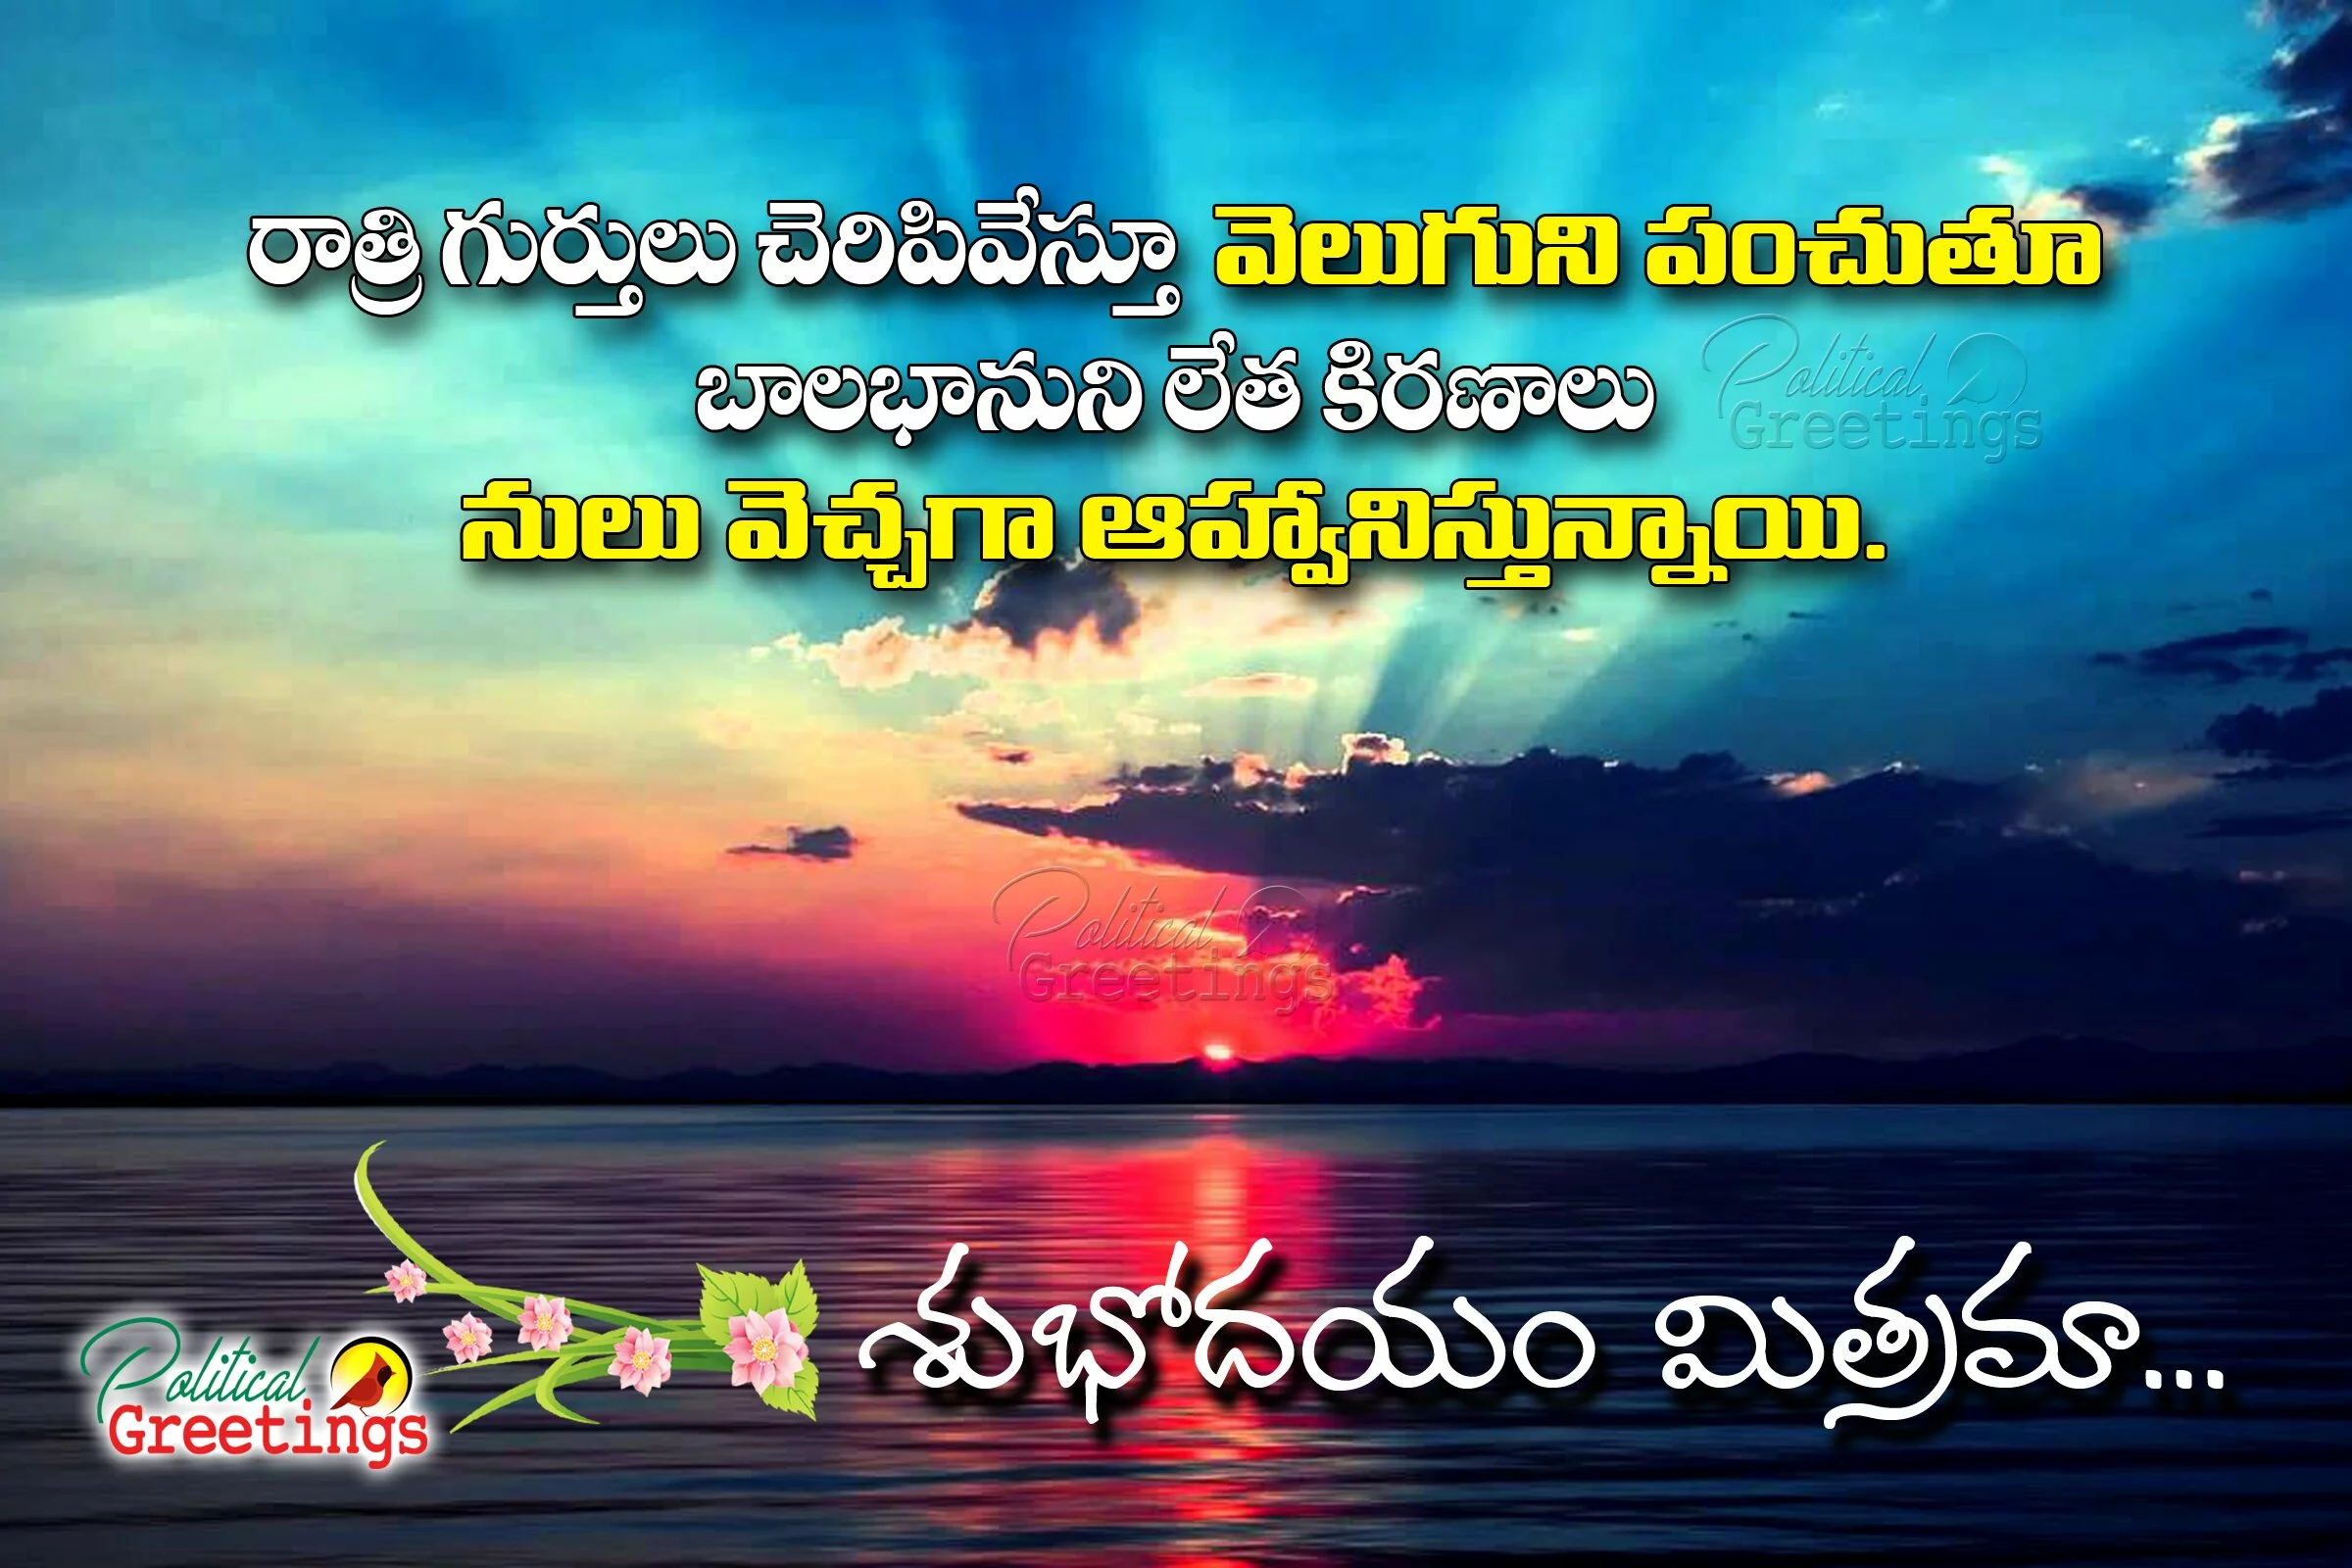 telugu-good-morning-quotes-wishes-greetings-pictures-wallpapers